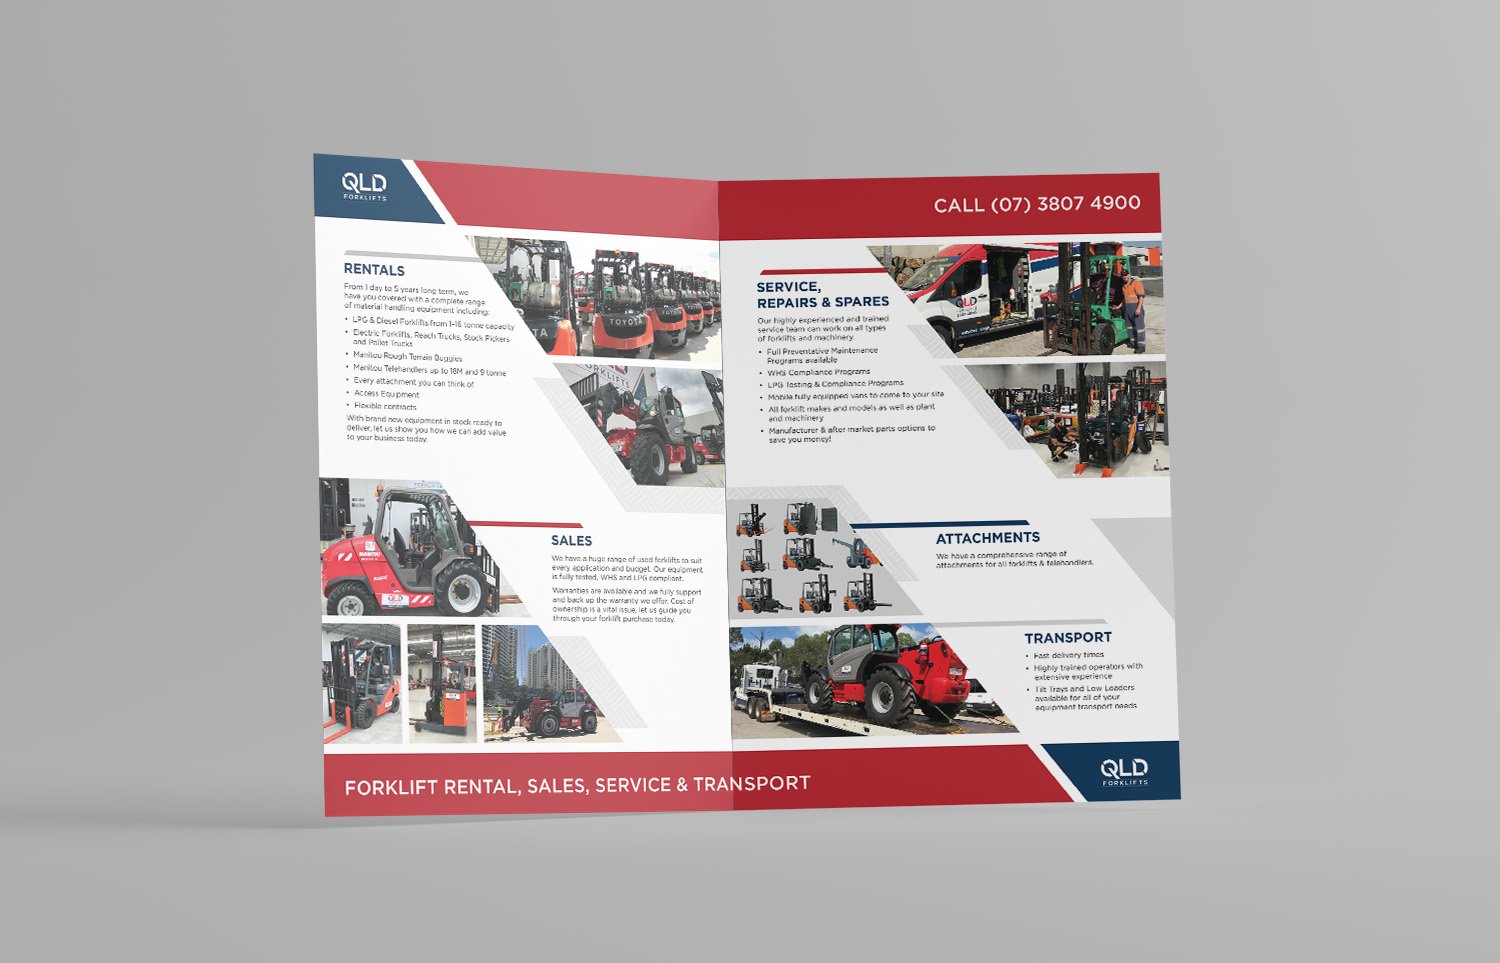 QLD Forklifts A4 brochure design and layout